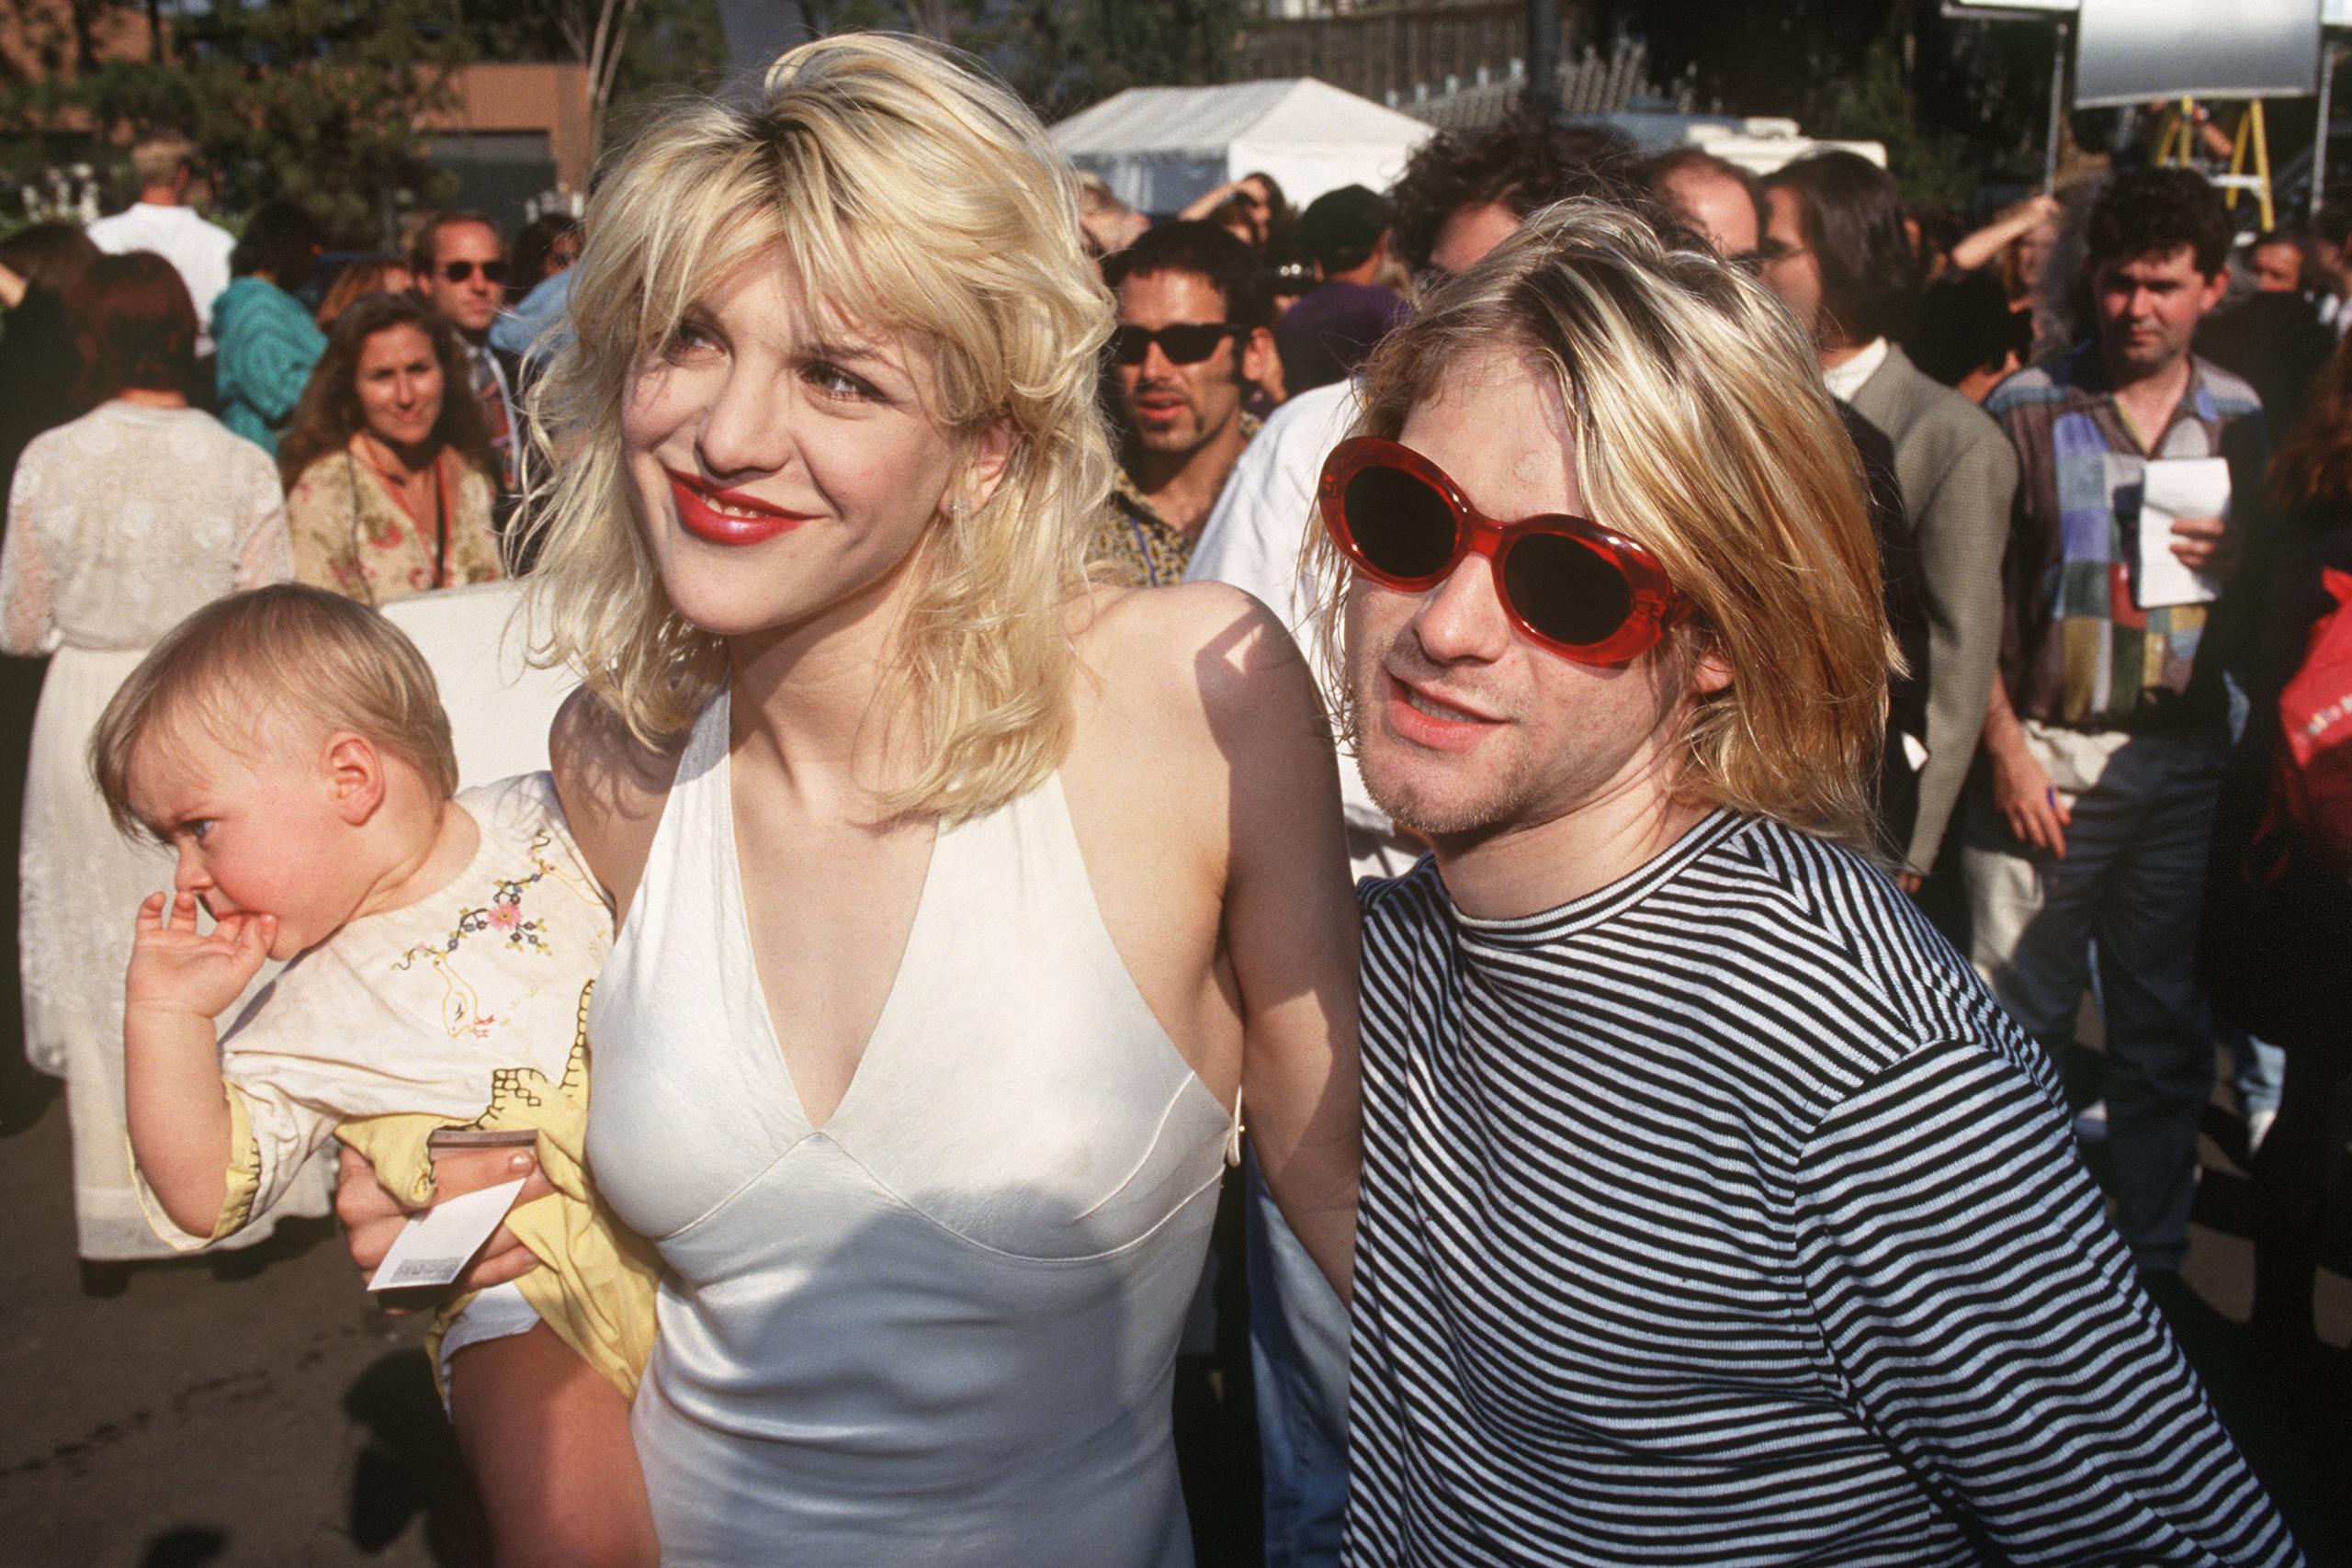  Courtney and Kurt Cobain with their daughter Frances in 1993